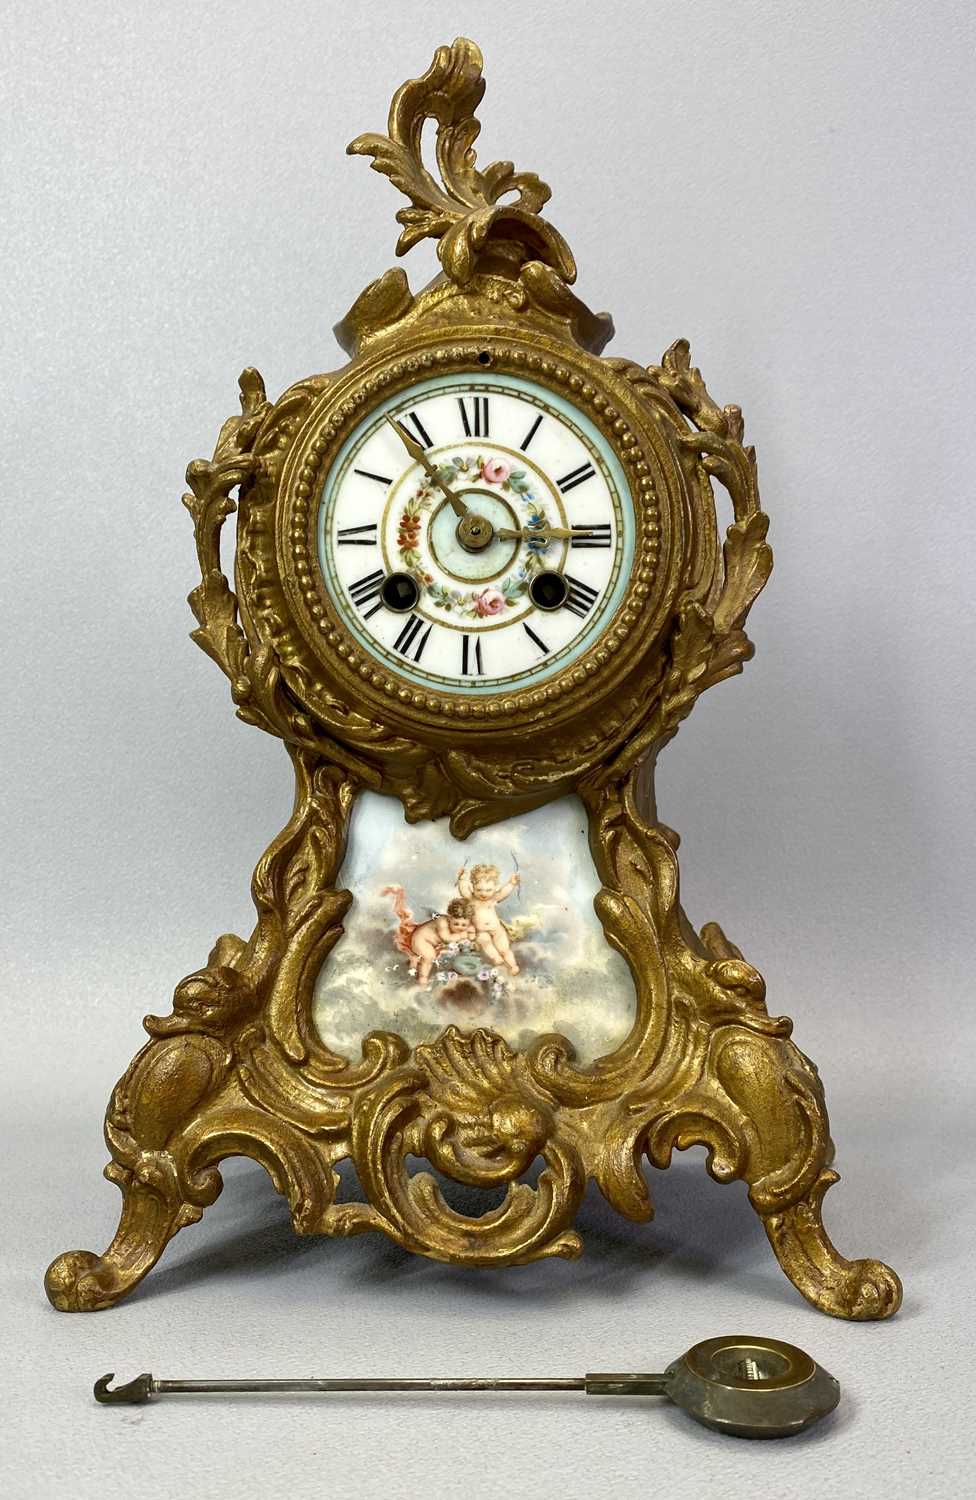 A FRENCH ROCOCO STYLE GILT PAINTED MANTEL CLOCK - late 19th century, circular porcelain dial hand - Image 2 of 5